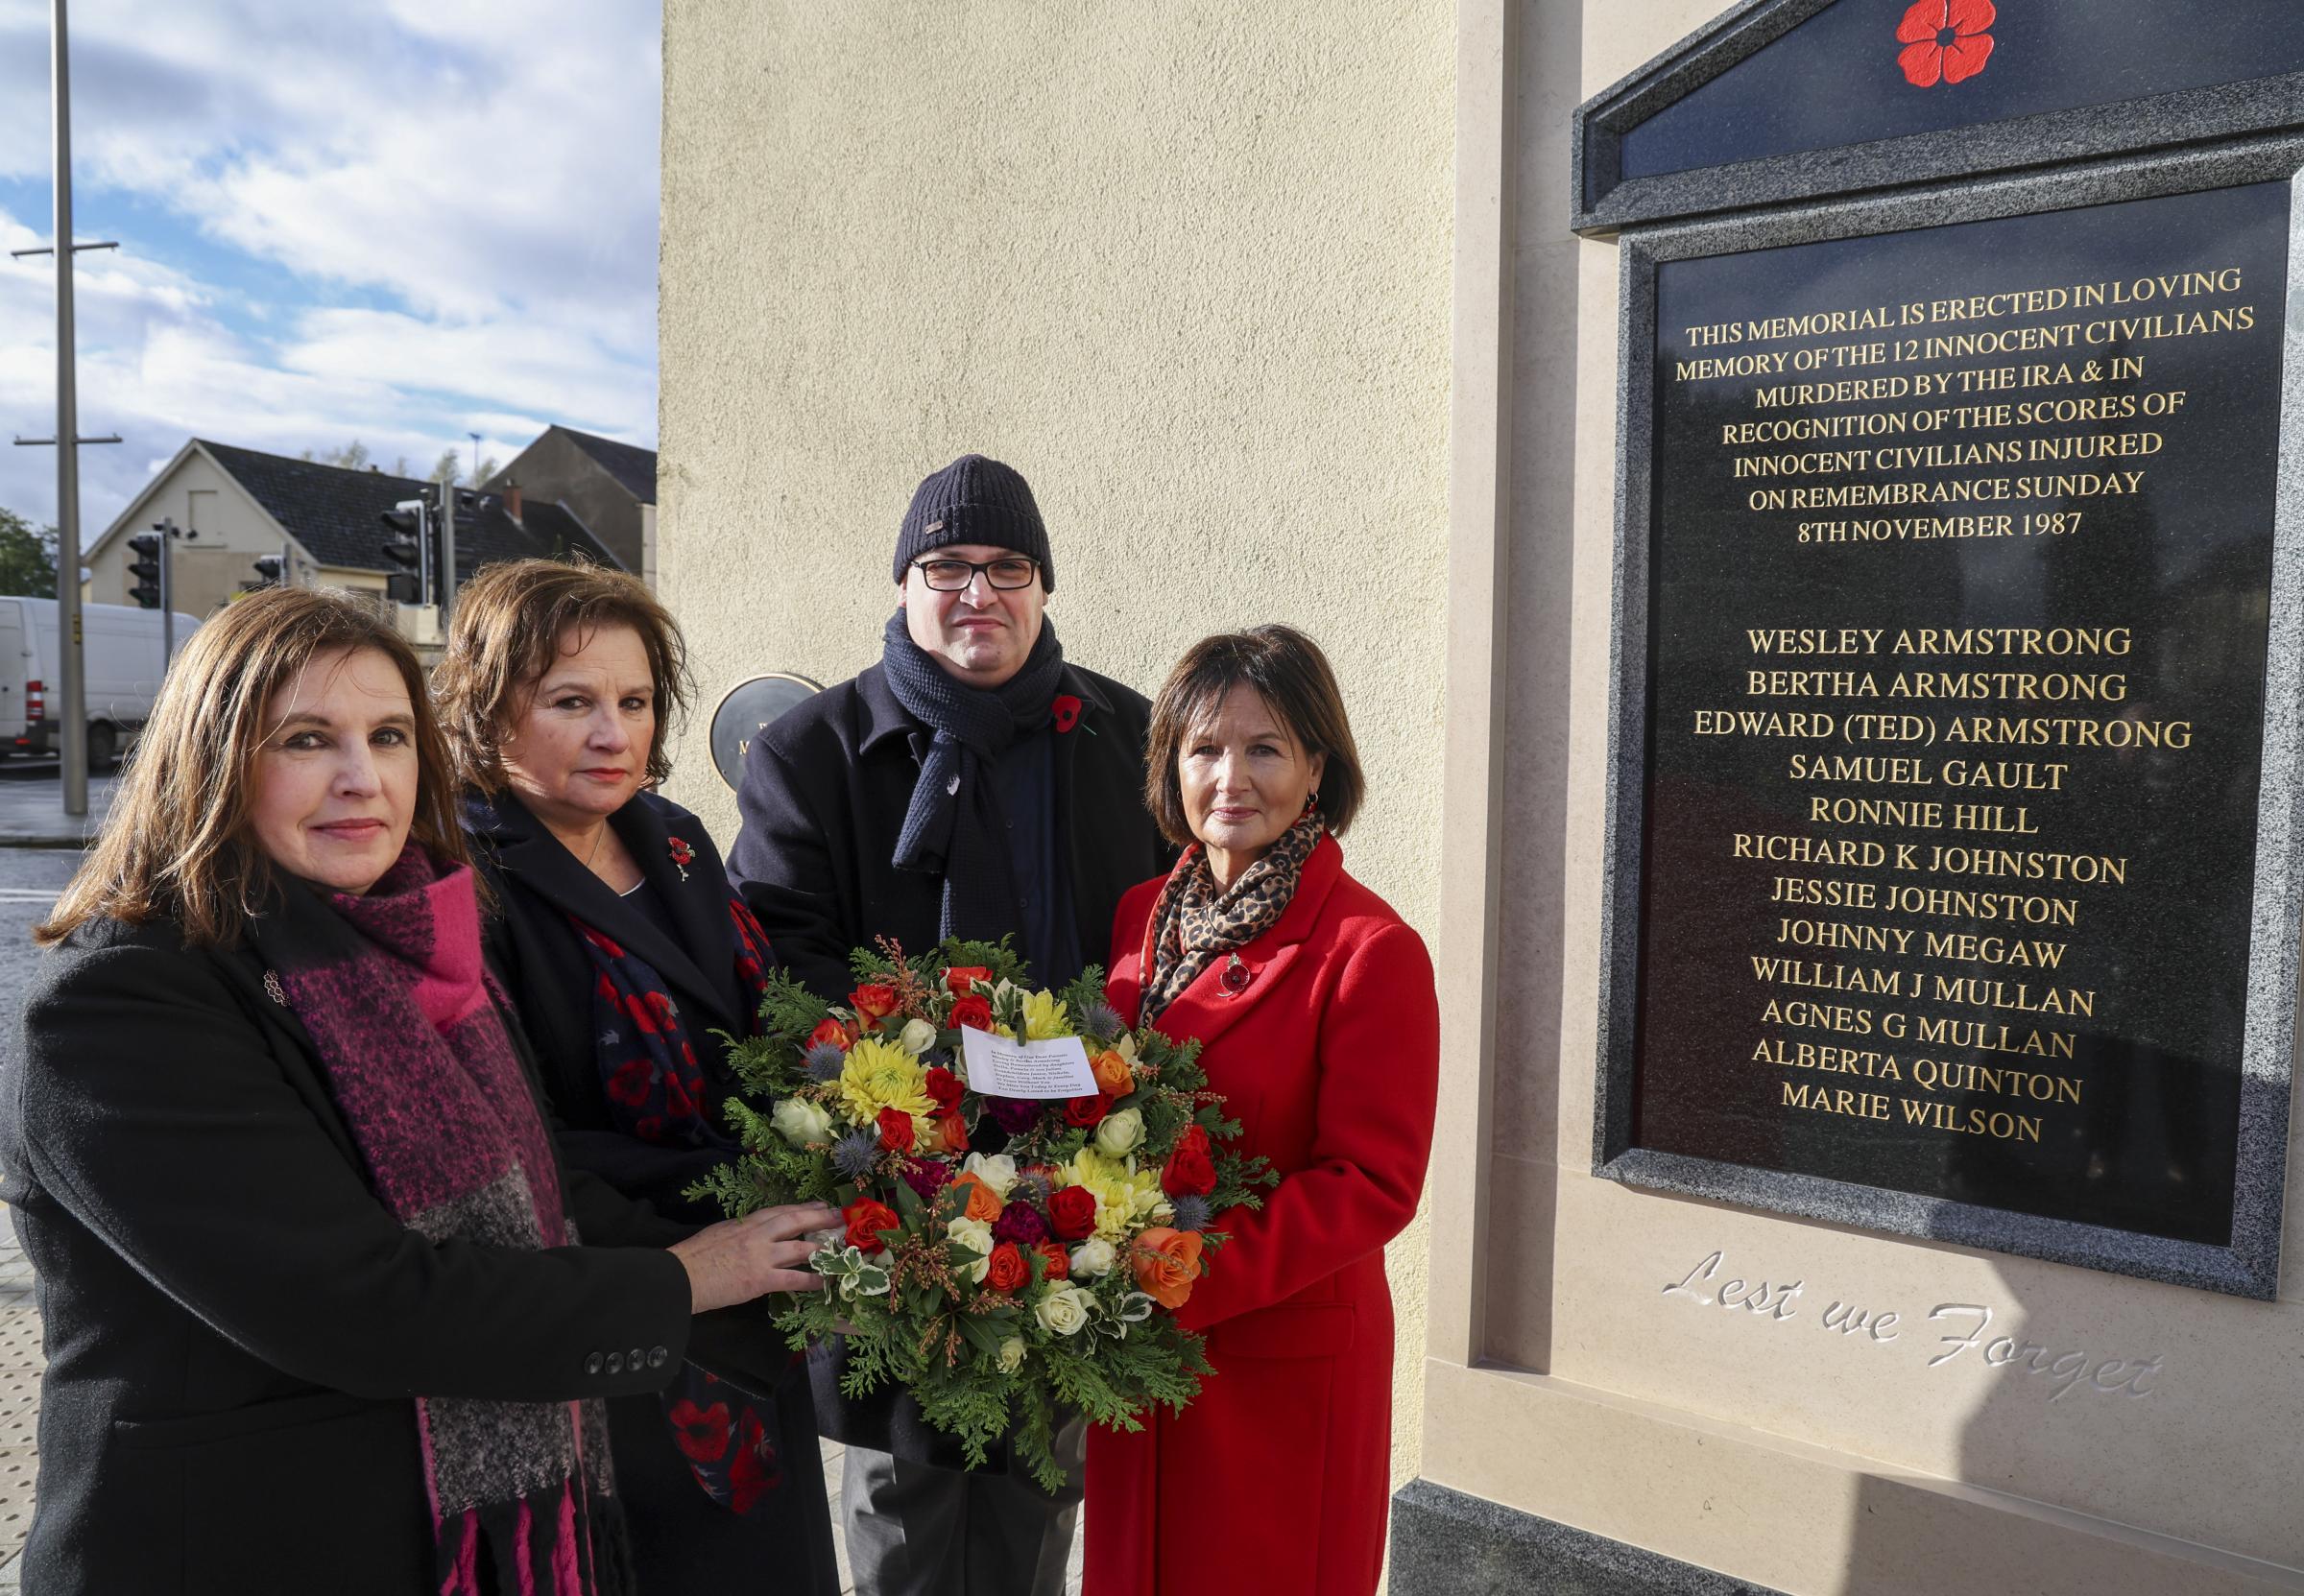 Moyna Nesbitt, Stella Robinson, Julian Armstrong and Pam Whitley, who layed a wreath in memory of their parents Wesley and Bertha Armstrong at the new memorial in Enniskillen.